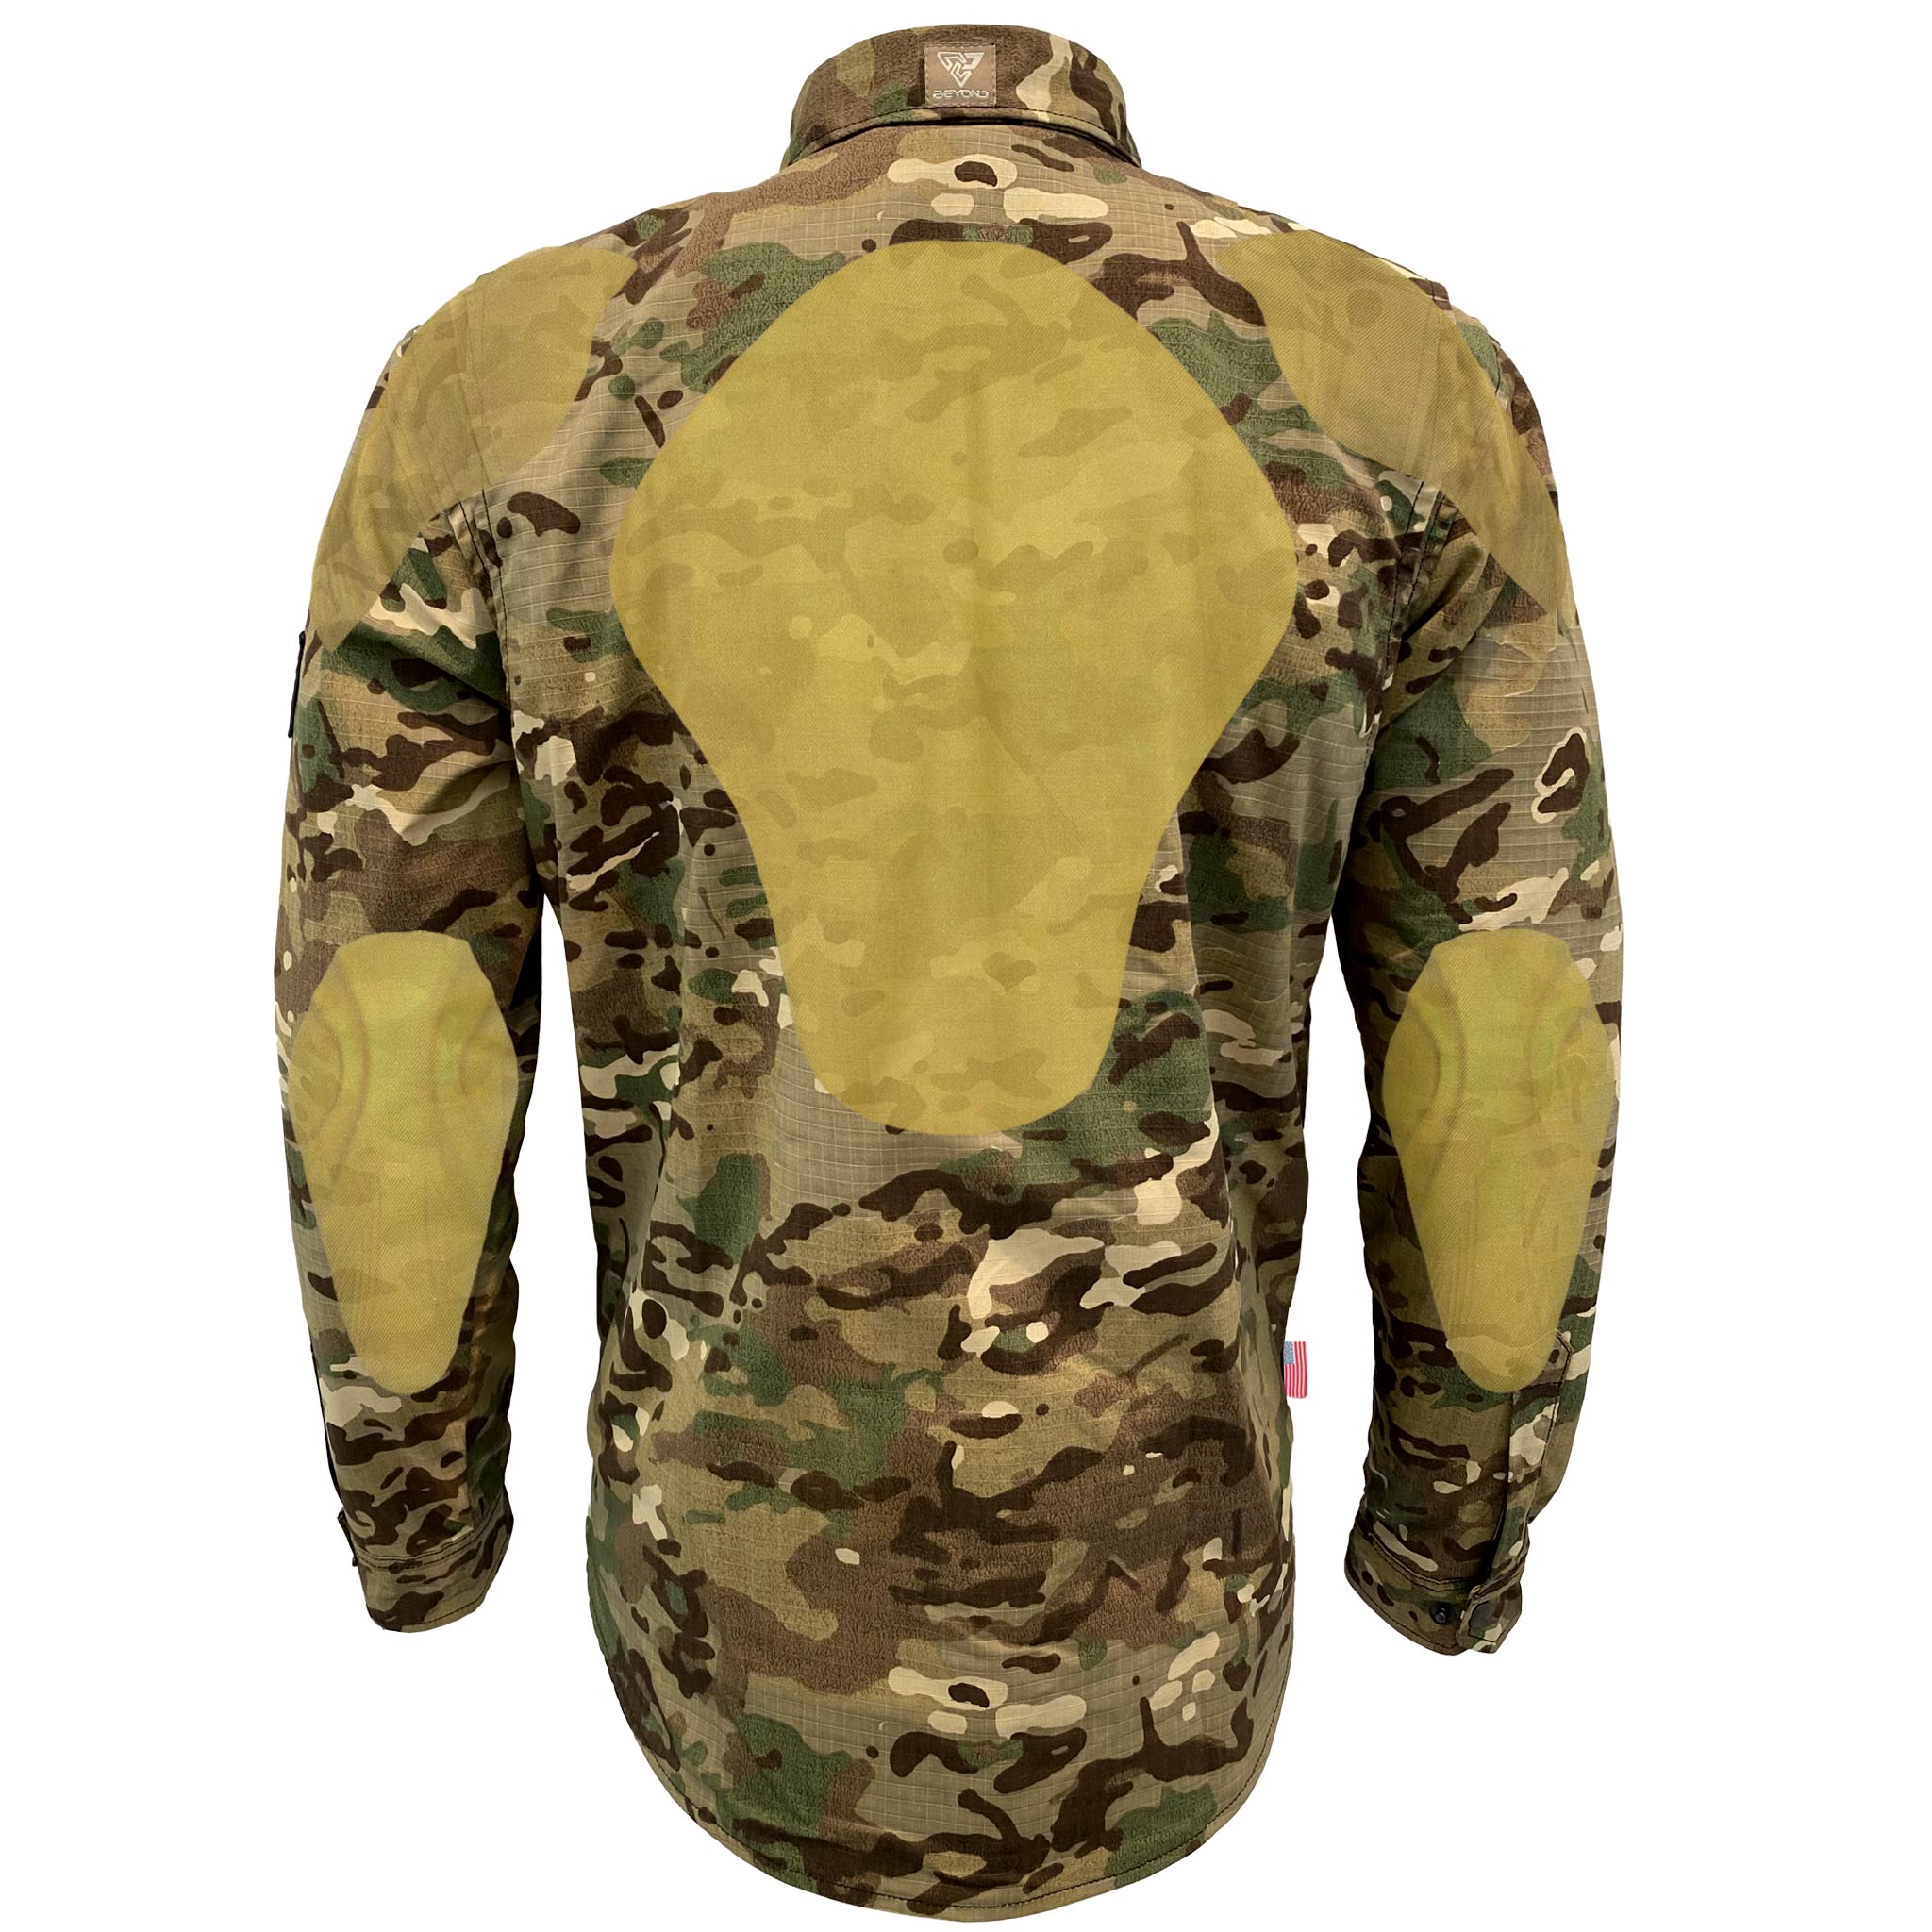 Protective Camouflage Shirt "Delta Four" - Light Color with Pads